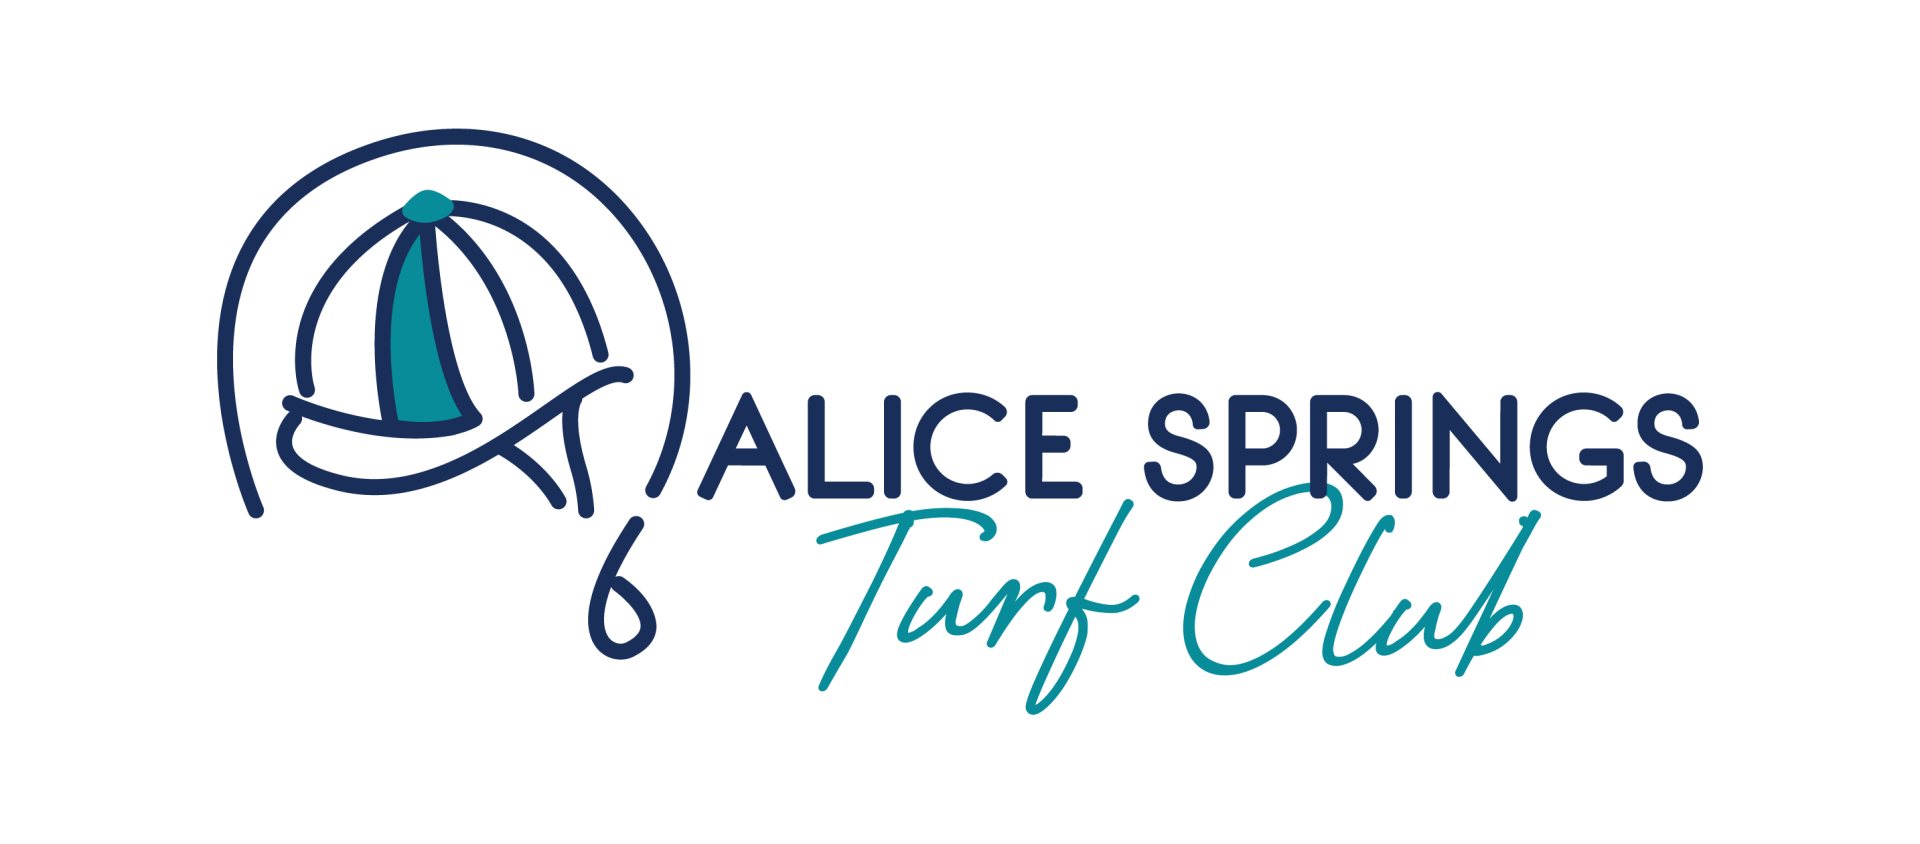 The logo for the alice springs turf club has a sailboat on it.